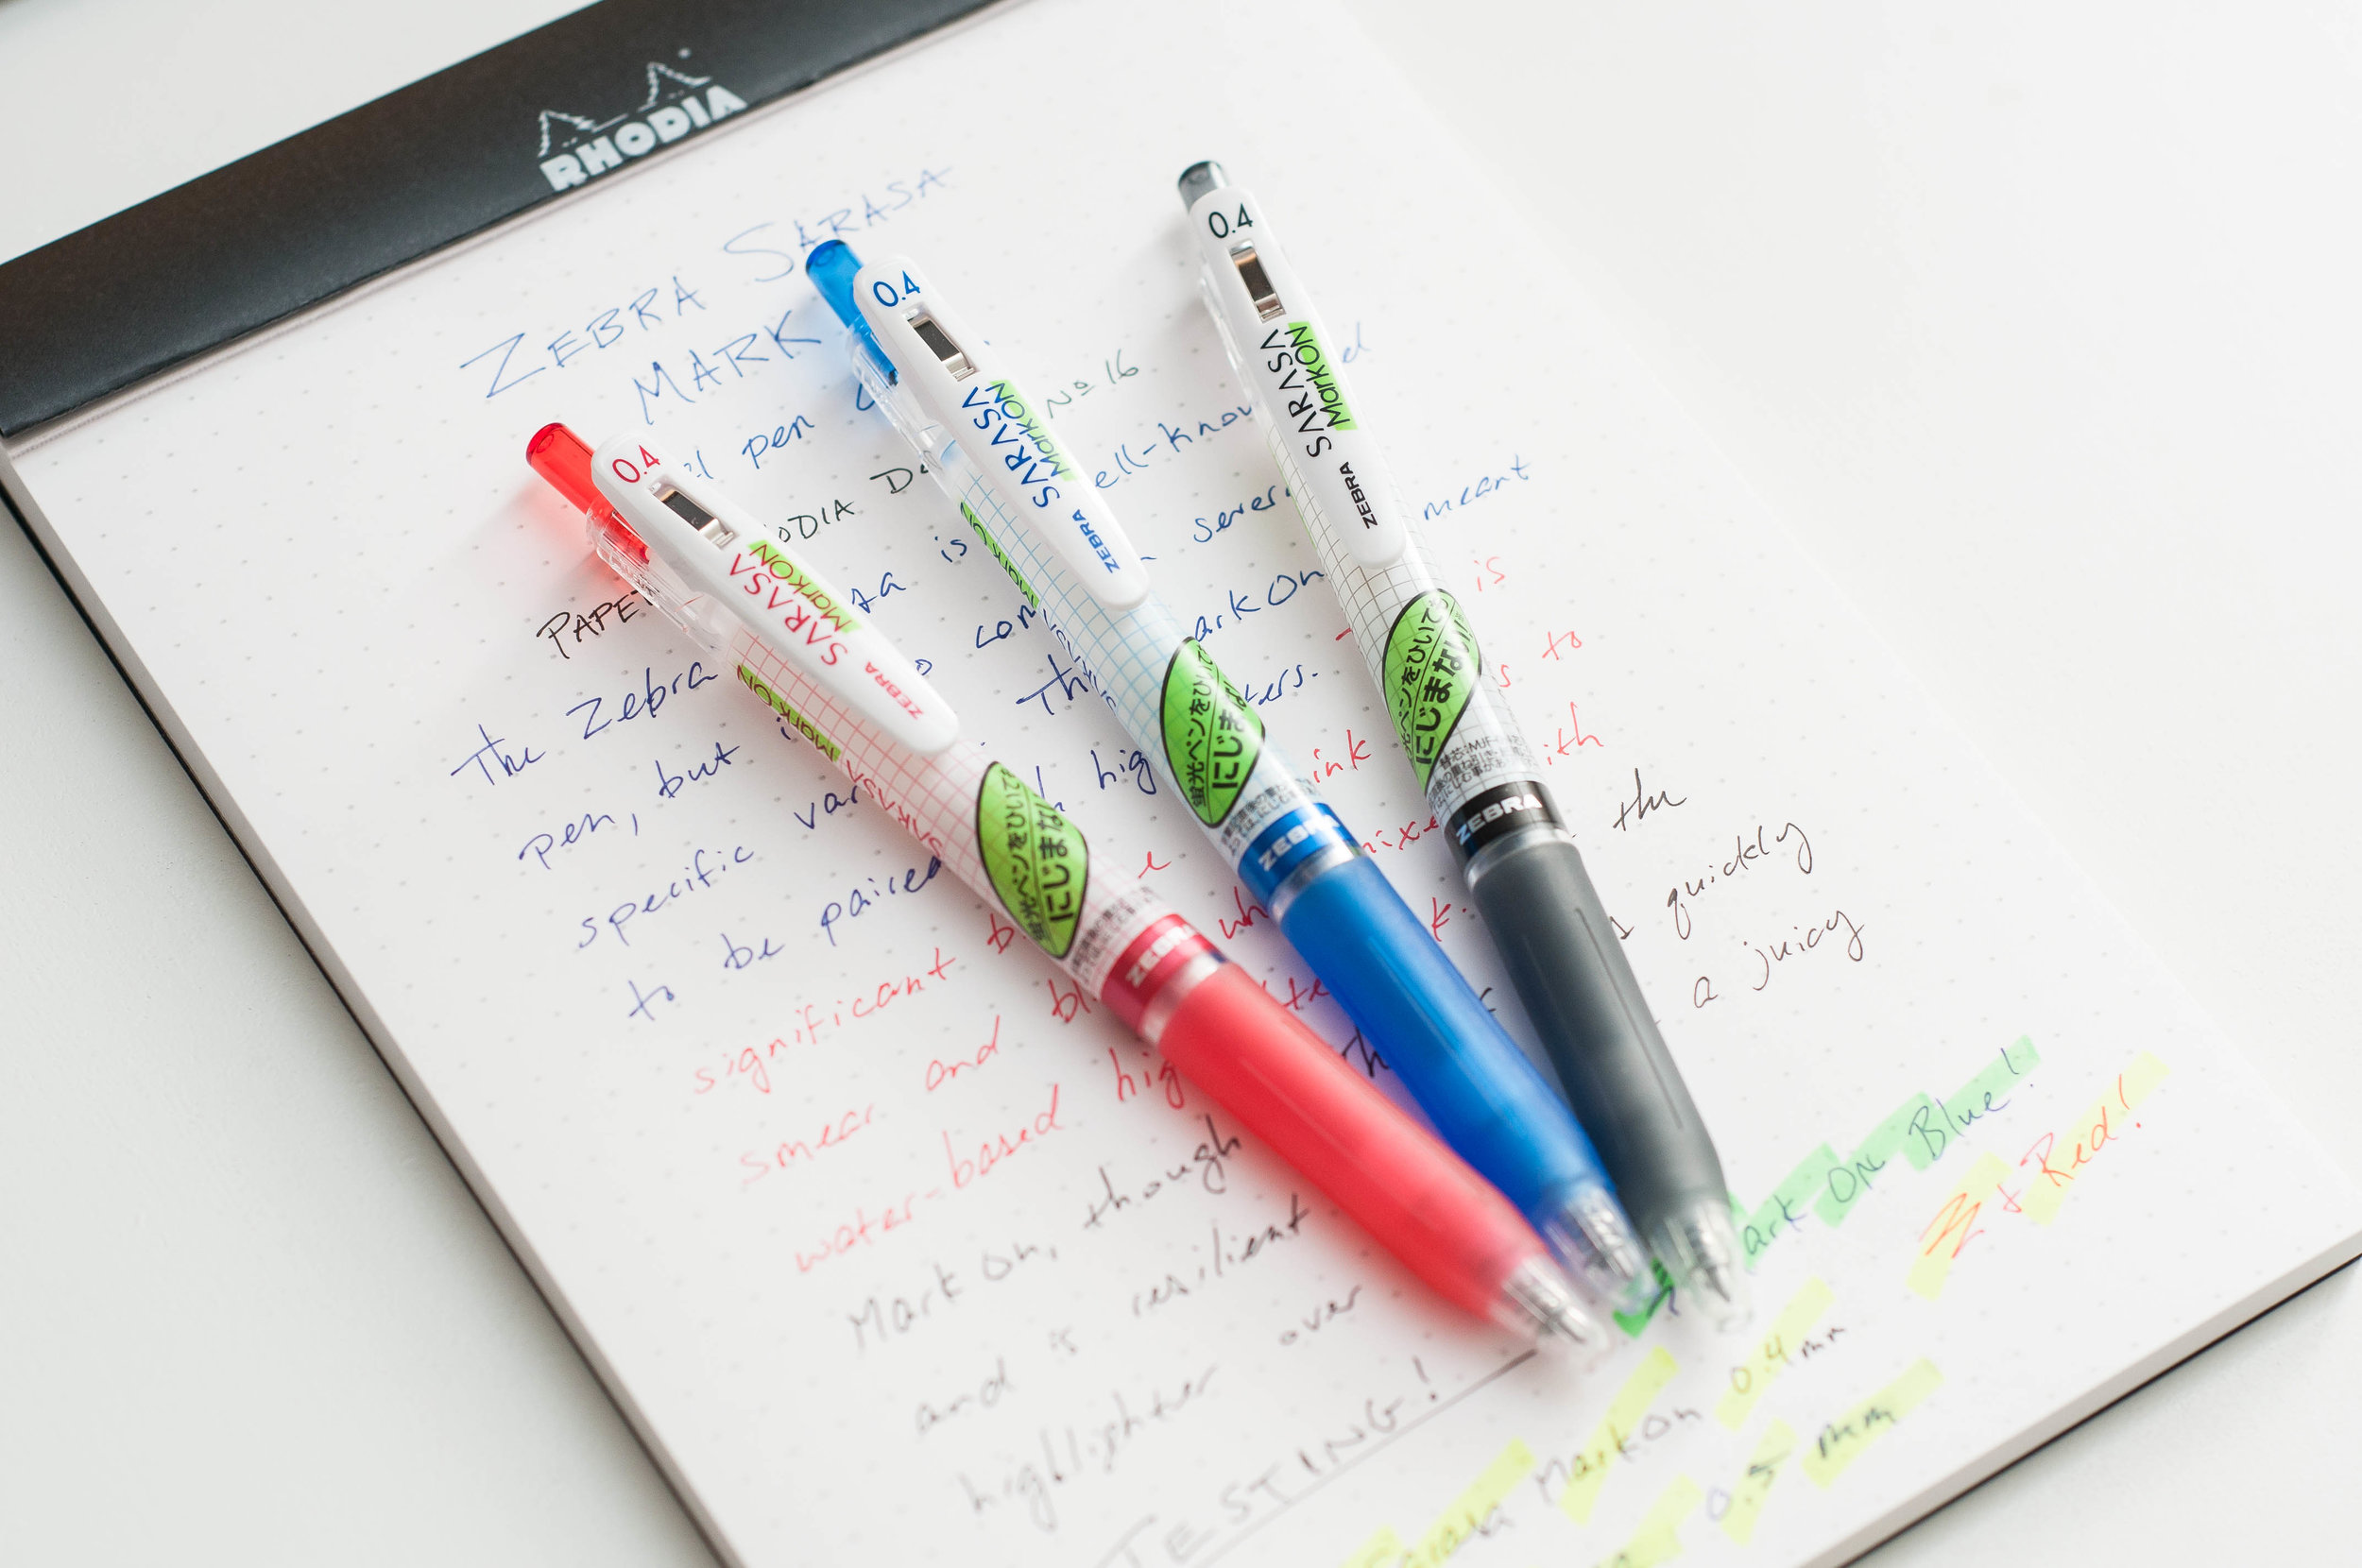 9 of the Best Pens for Note Taking – Ink+Volt